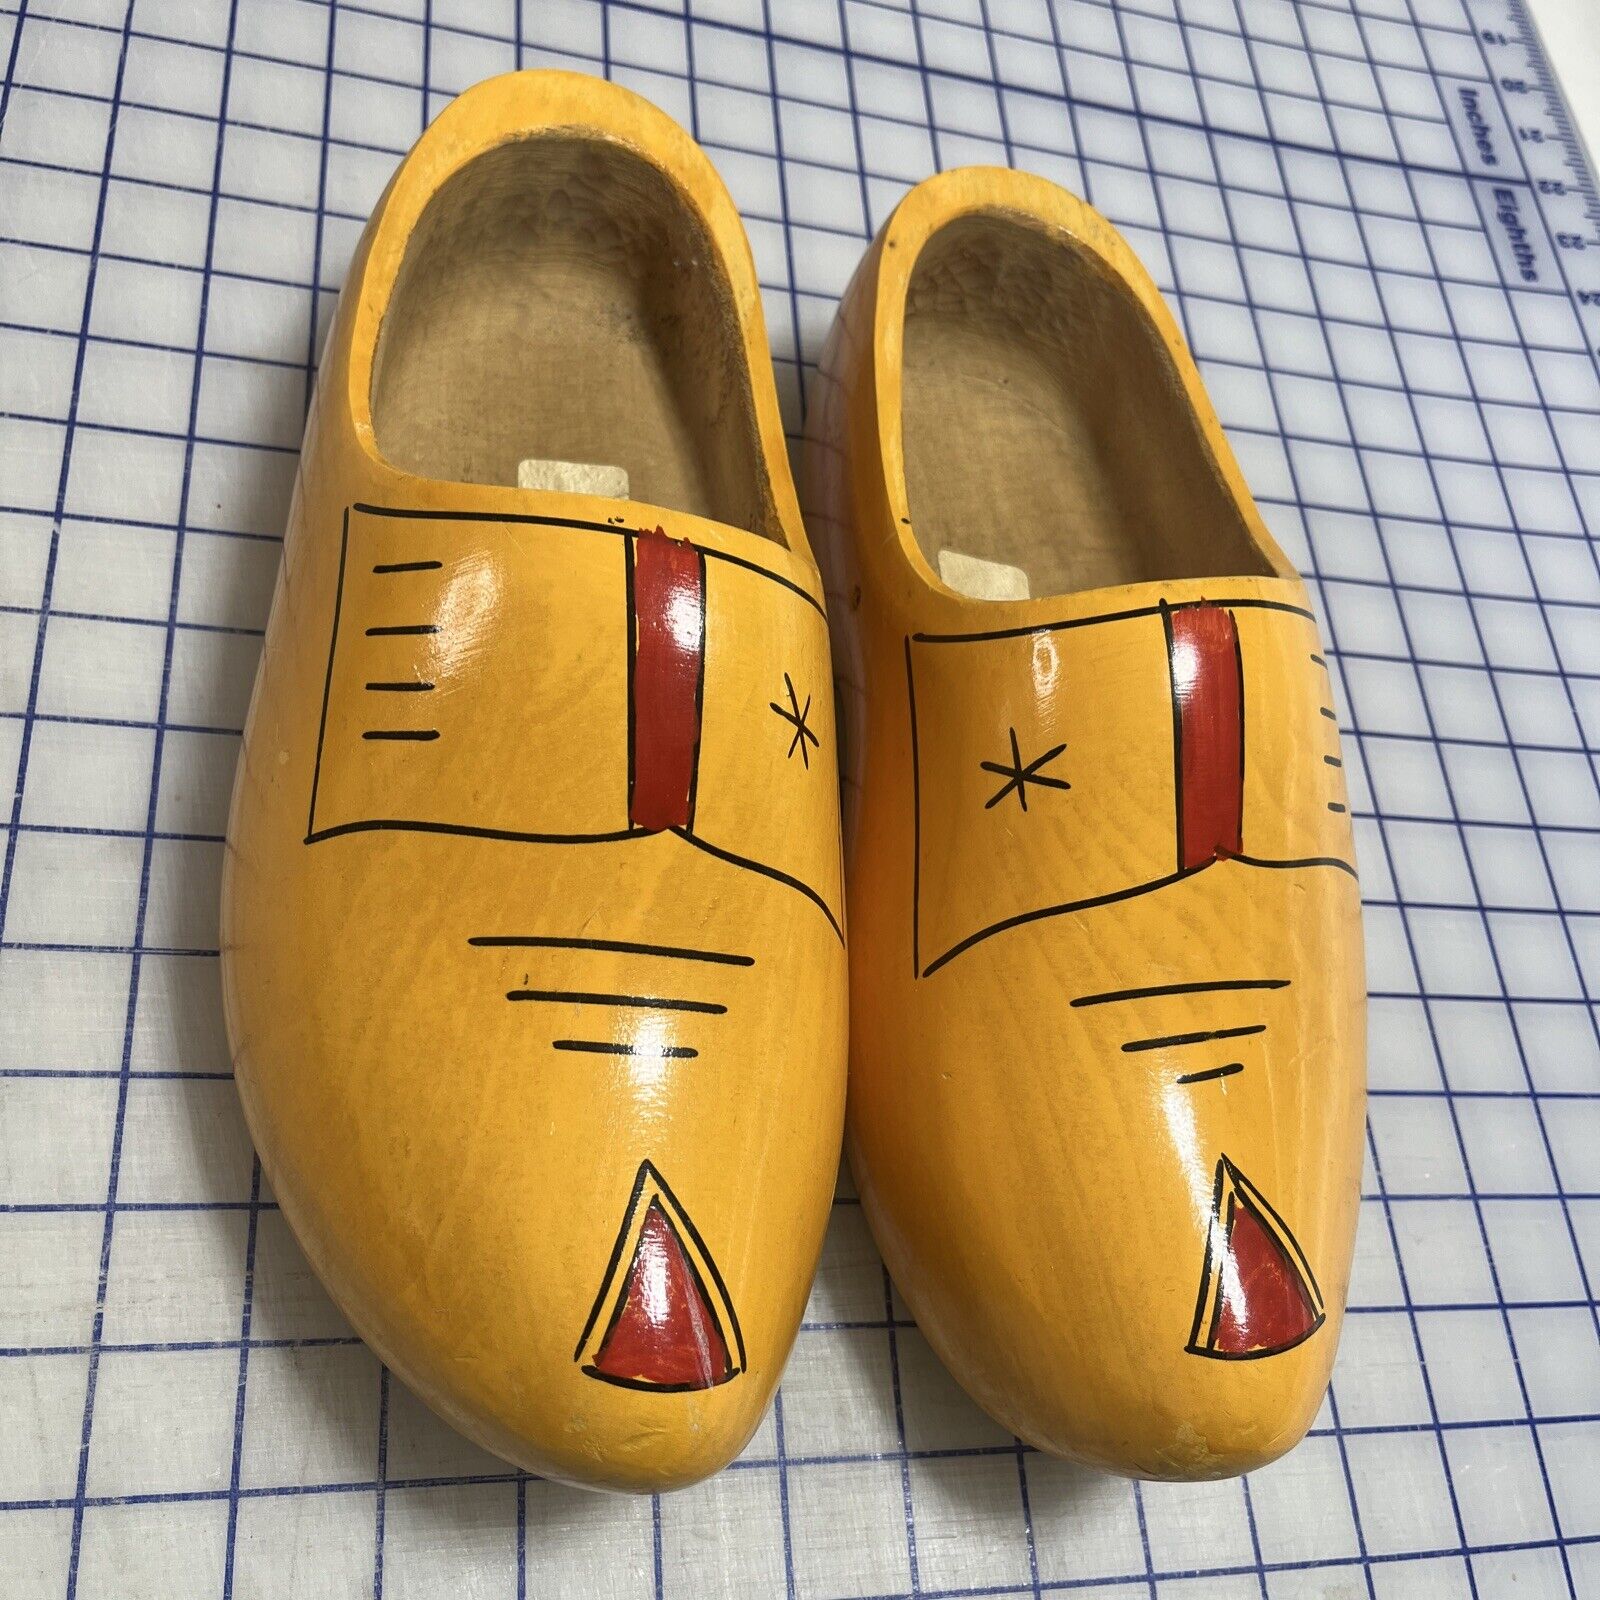 DUTCH CLOGS WOODEN WOOD HANDCARVED HANDPAINTED HOLLAND 10” Yellow Red